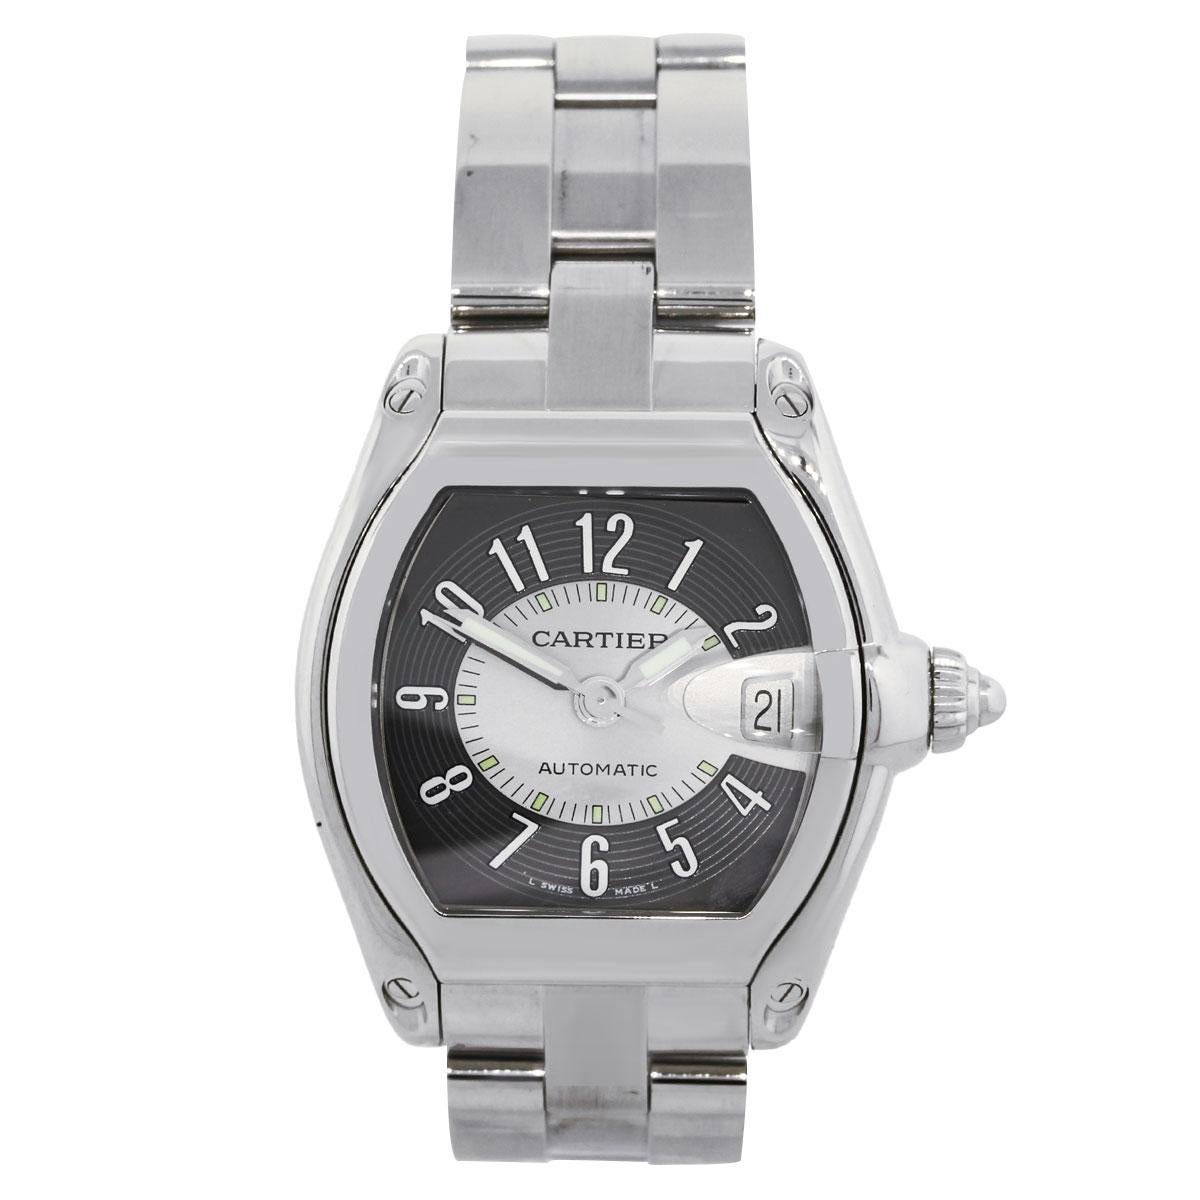 Brand: Cartier
MPN: 2510
Model: Roadster
Case Material: Stainless steel
Case Diameter: 36mm
Crystal: Sapphire crystal
Bezel: Stainless Steel smooth bezel
Dial: Dark silver with silver hour markers and hands. Date is displayed at 3 o’